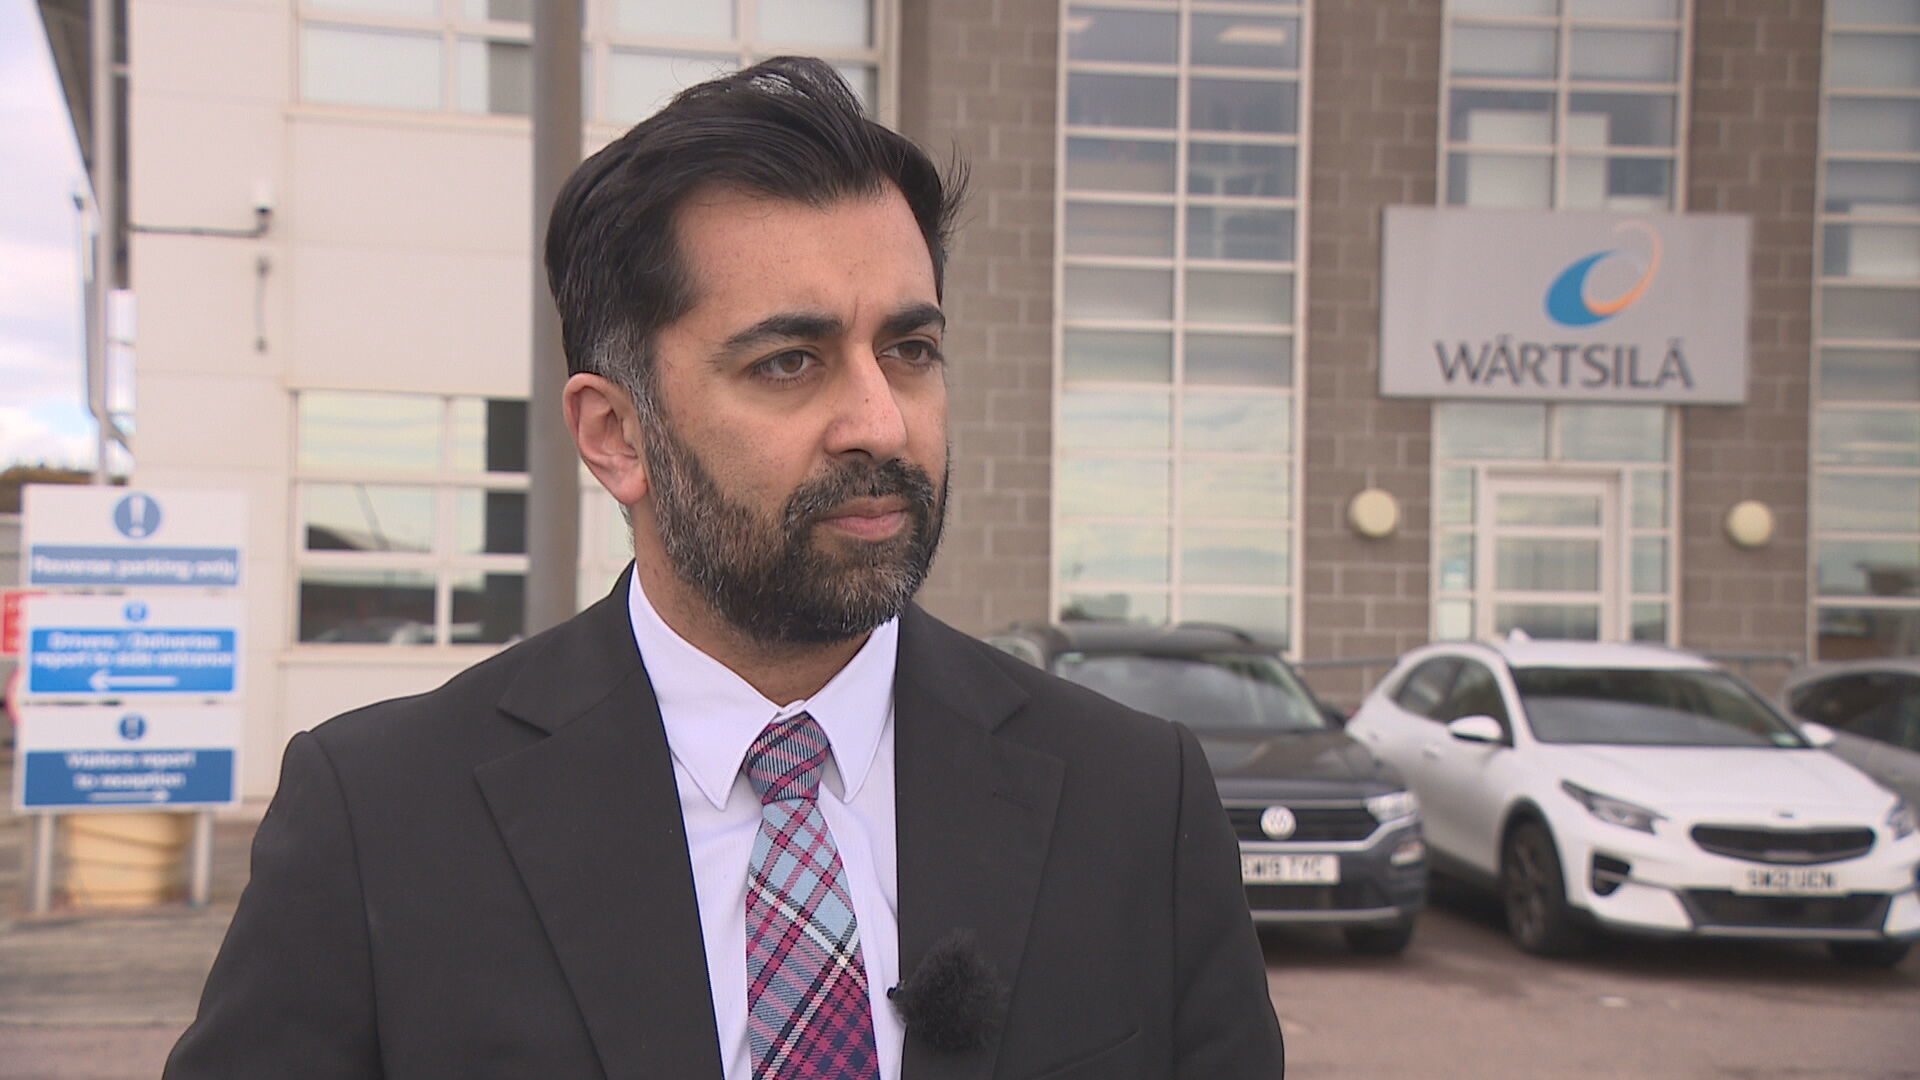 Humza Yousaf - who backed the Bill as health secretary - previously said he was open to finding a 'compromise' with people who had concerns about the Bill.